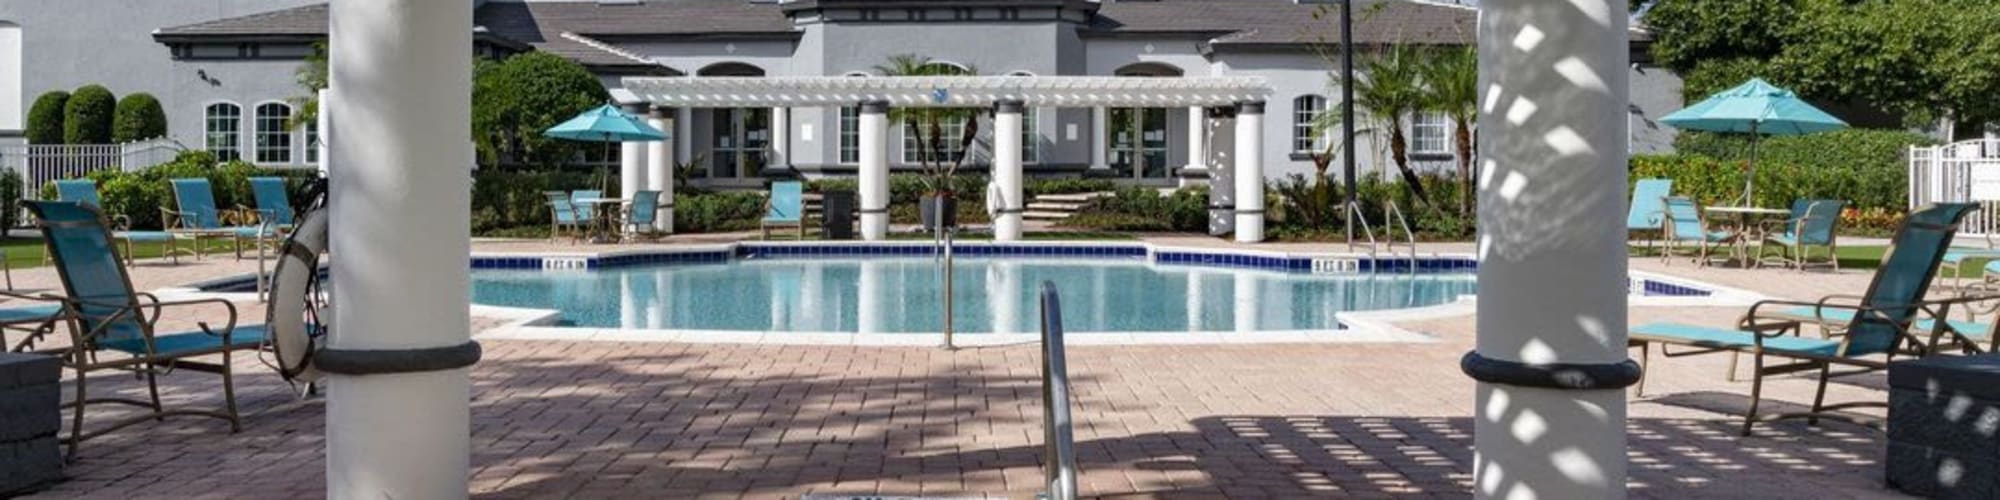  Amenities | The Fairways at Lake Mary in Lake Mary, Florida